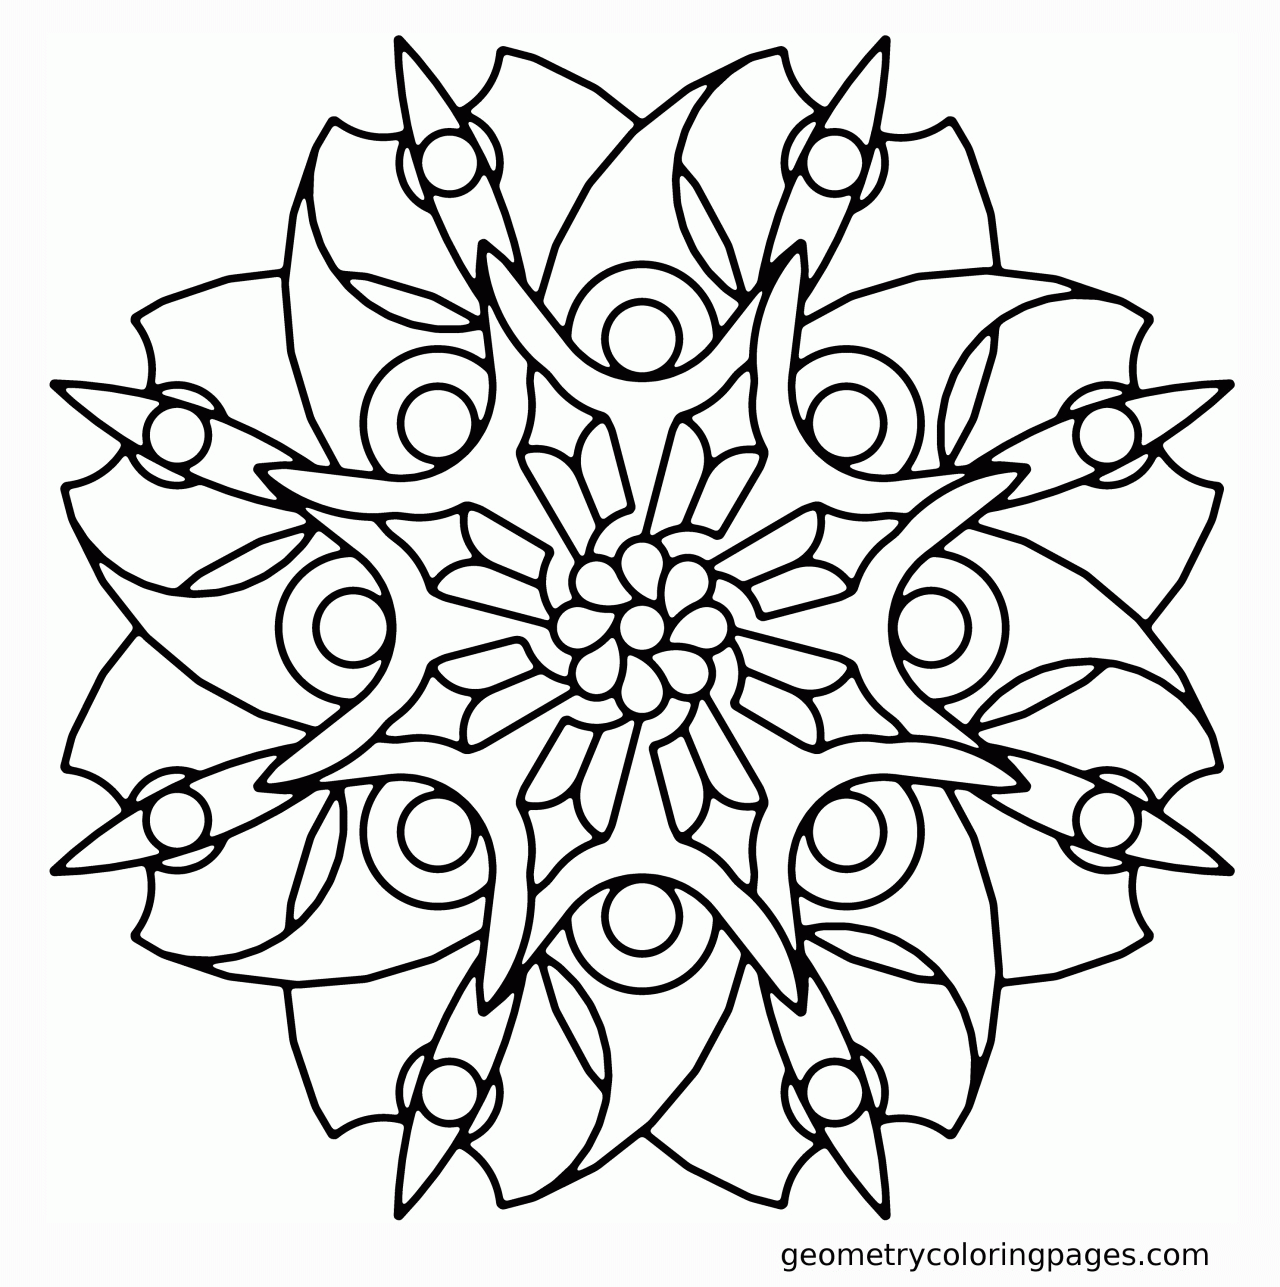 Geometry Coloring Pages